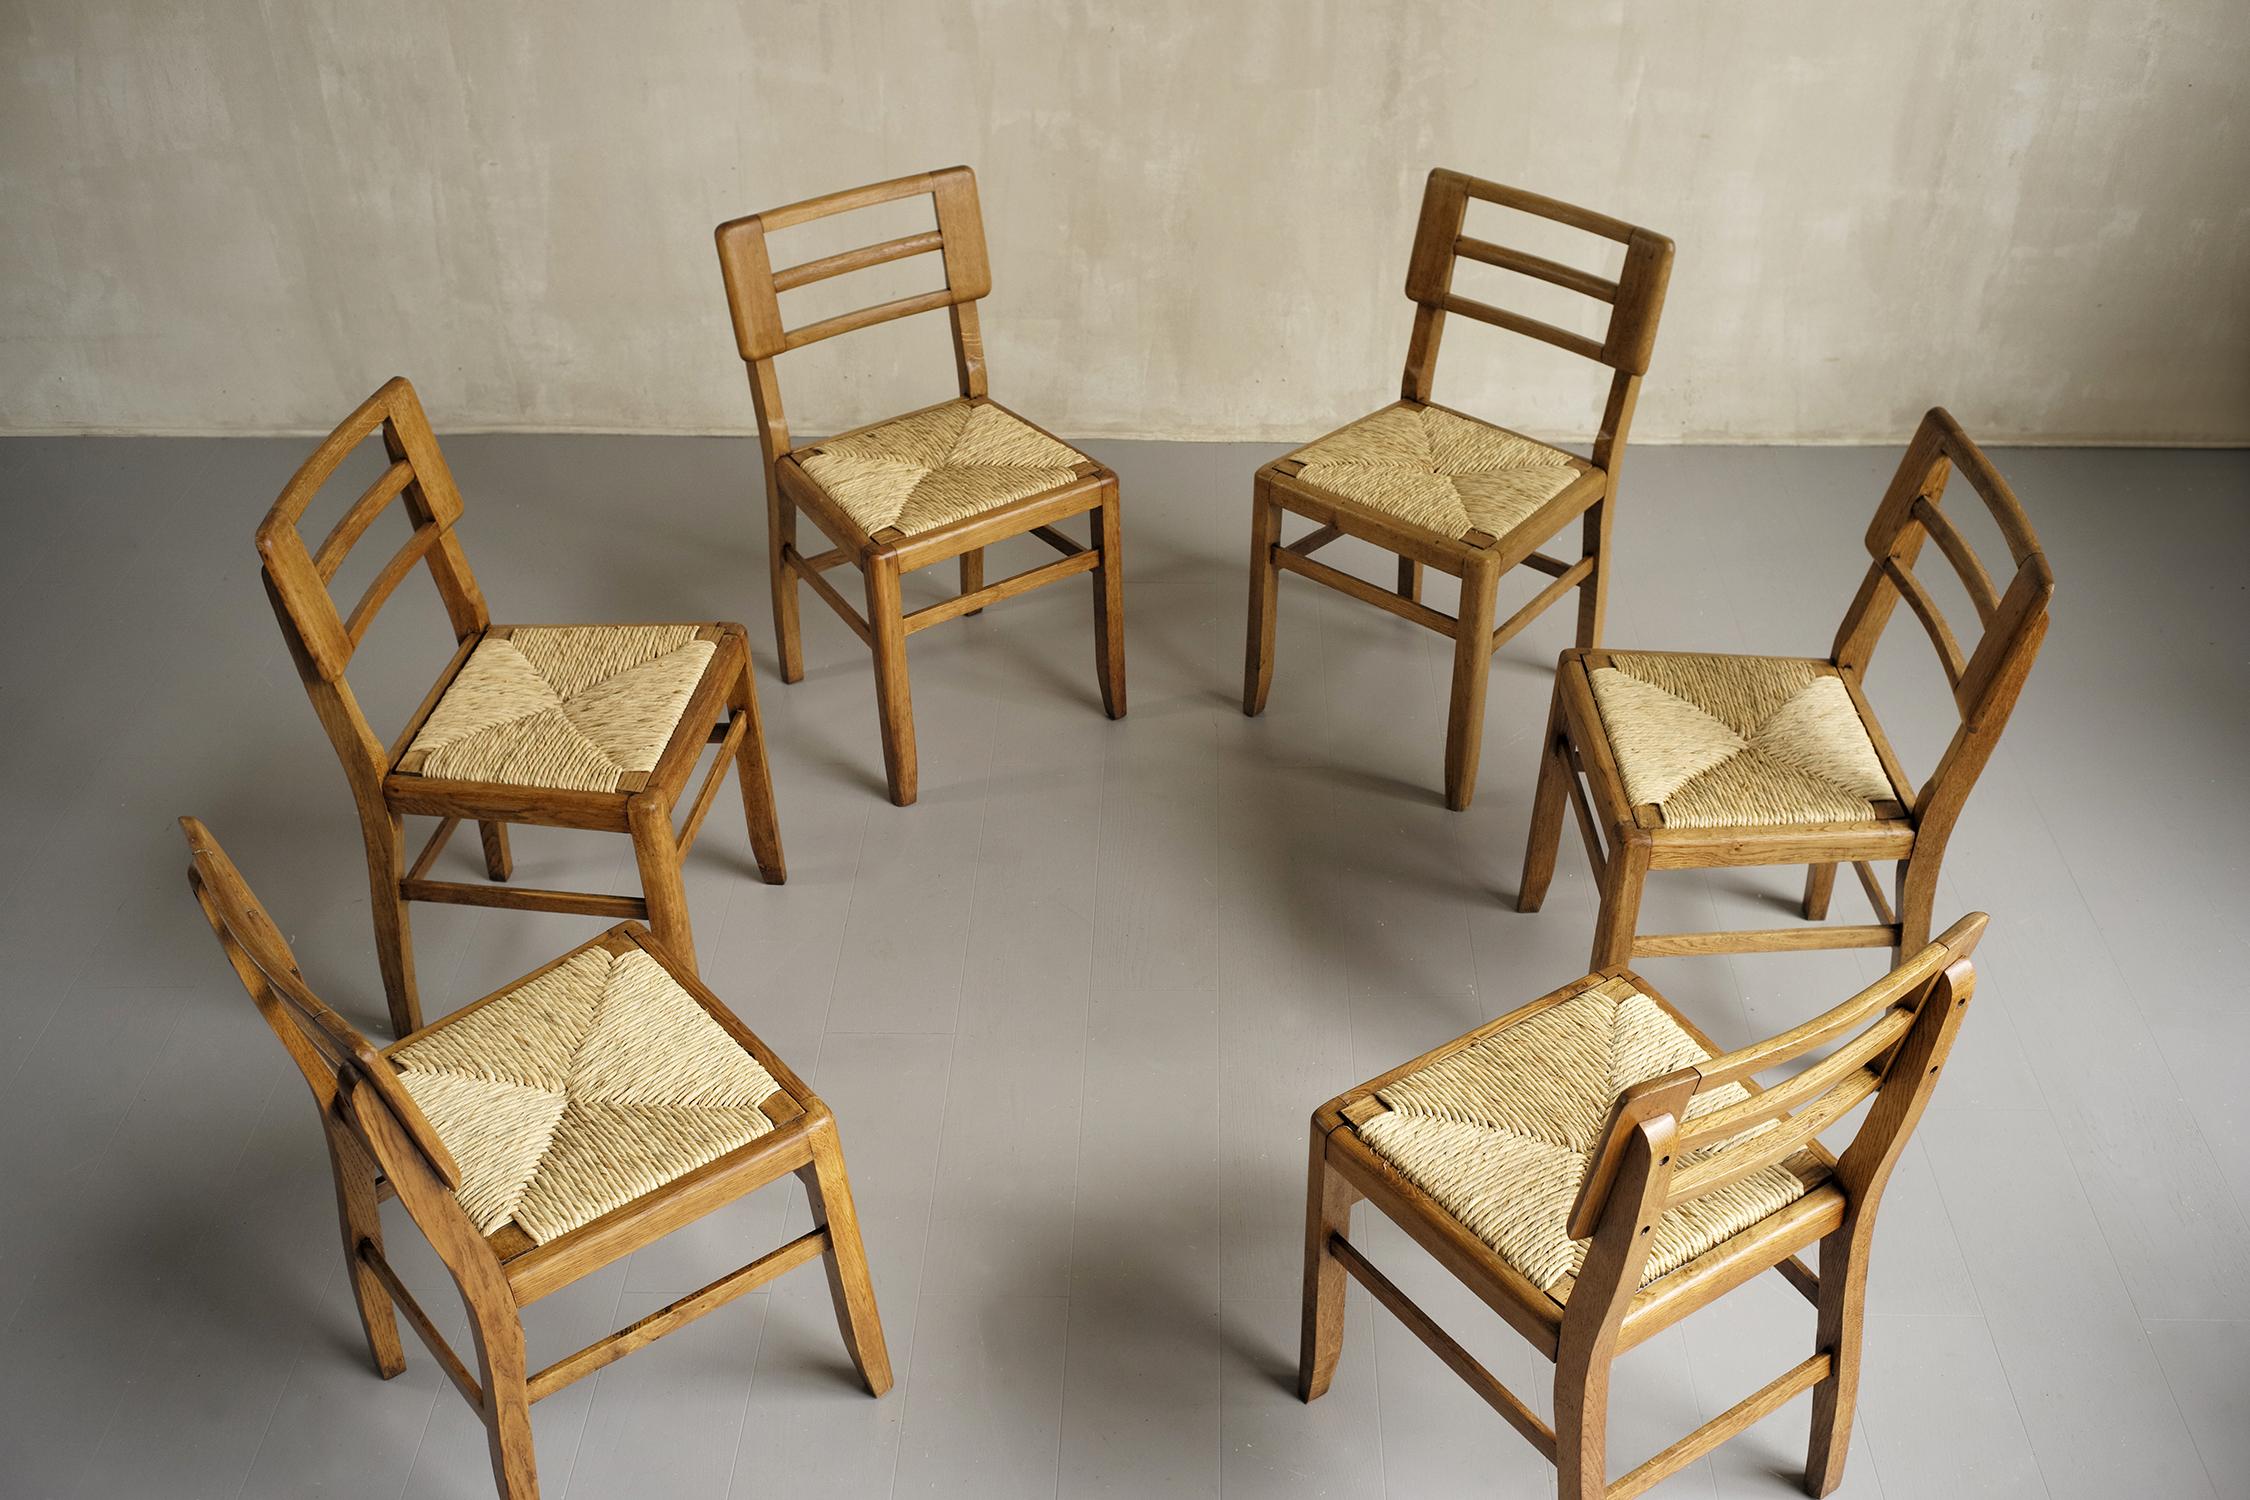 Pierre Cruège, Set of 6 Straw Chairs, France, 1950 For Sale 3